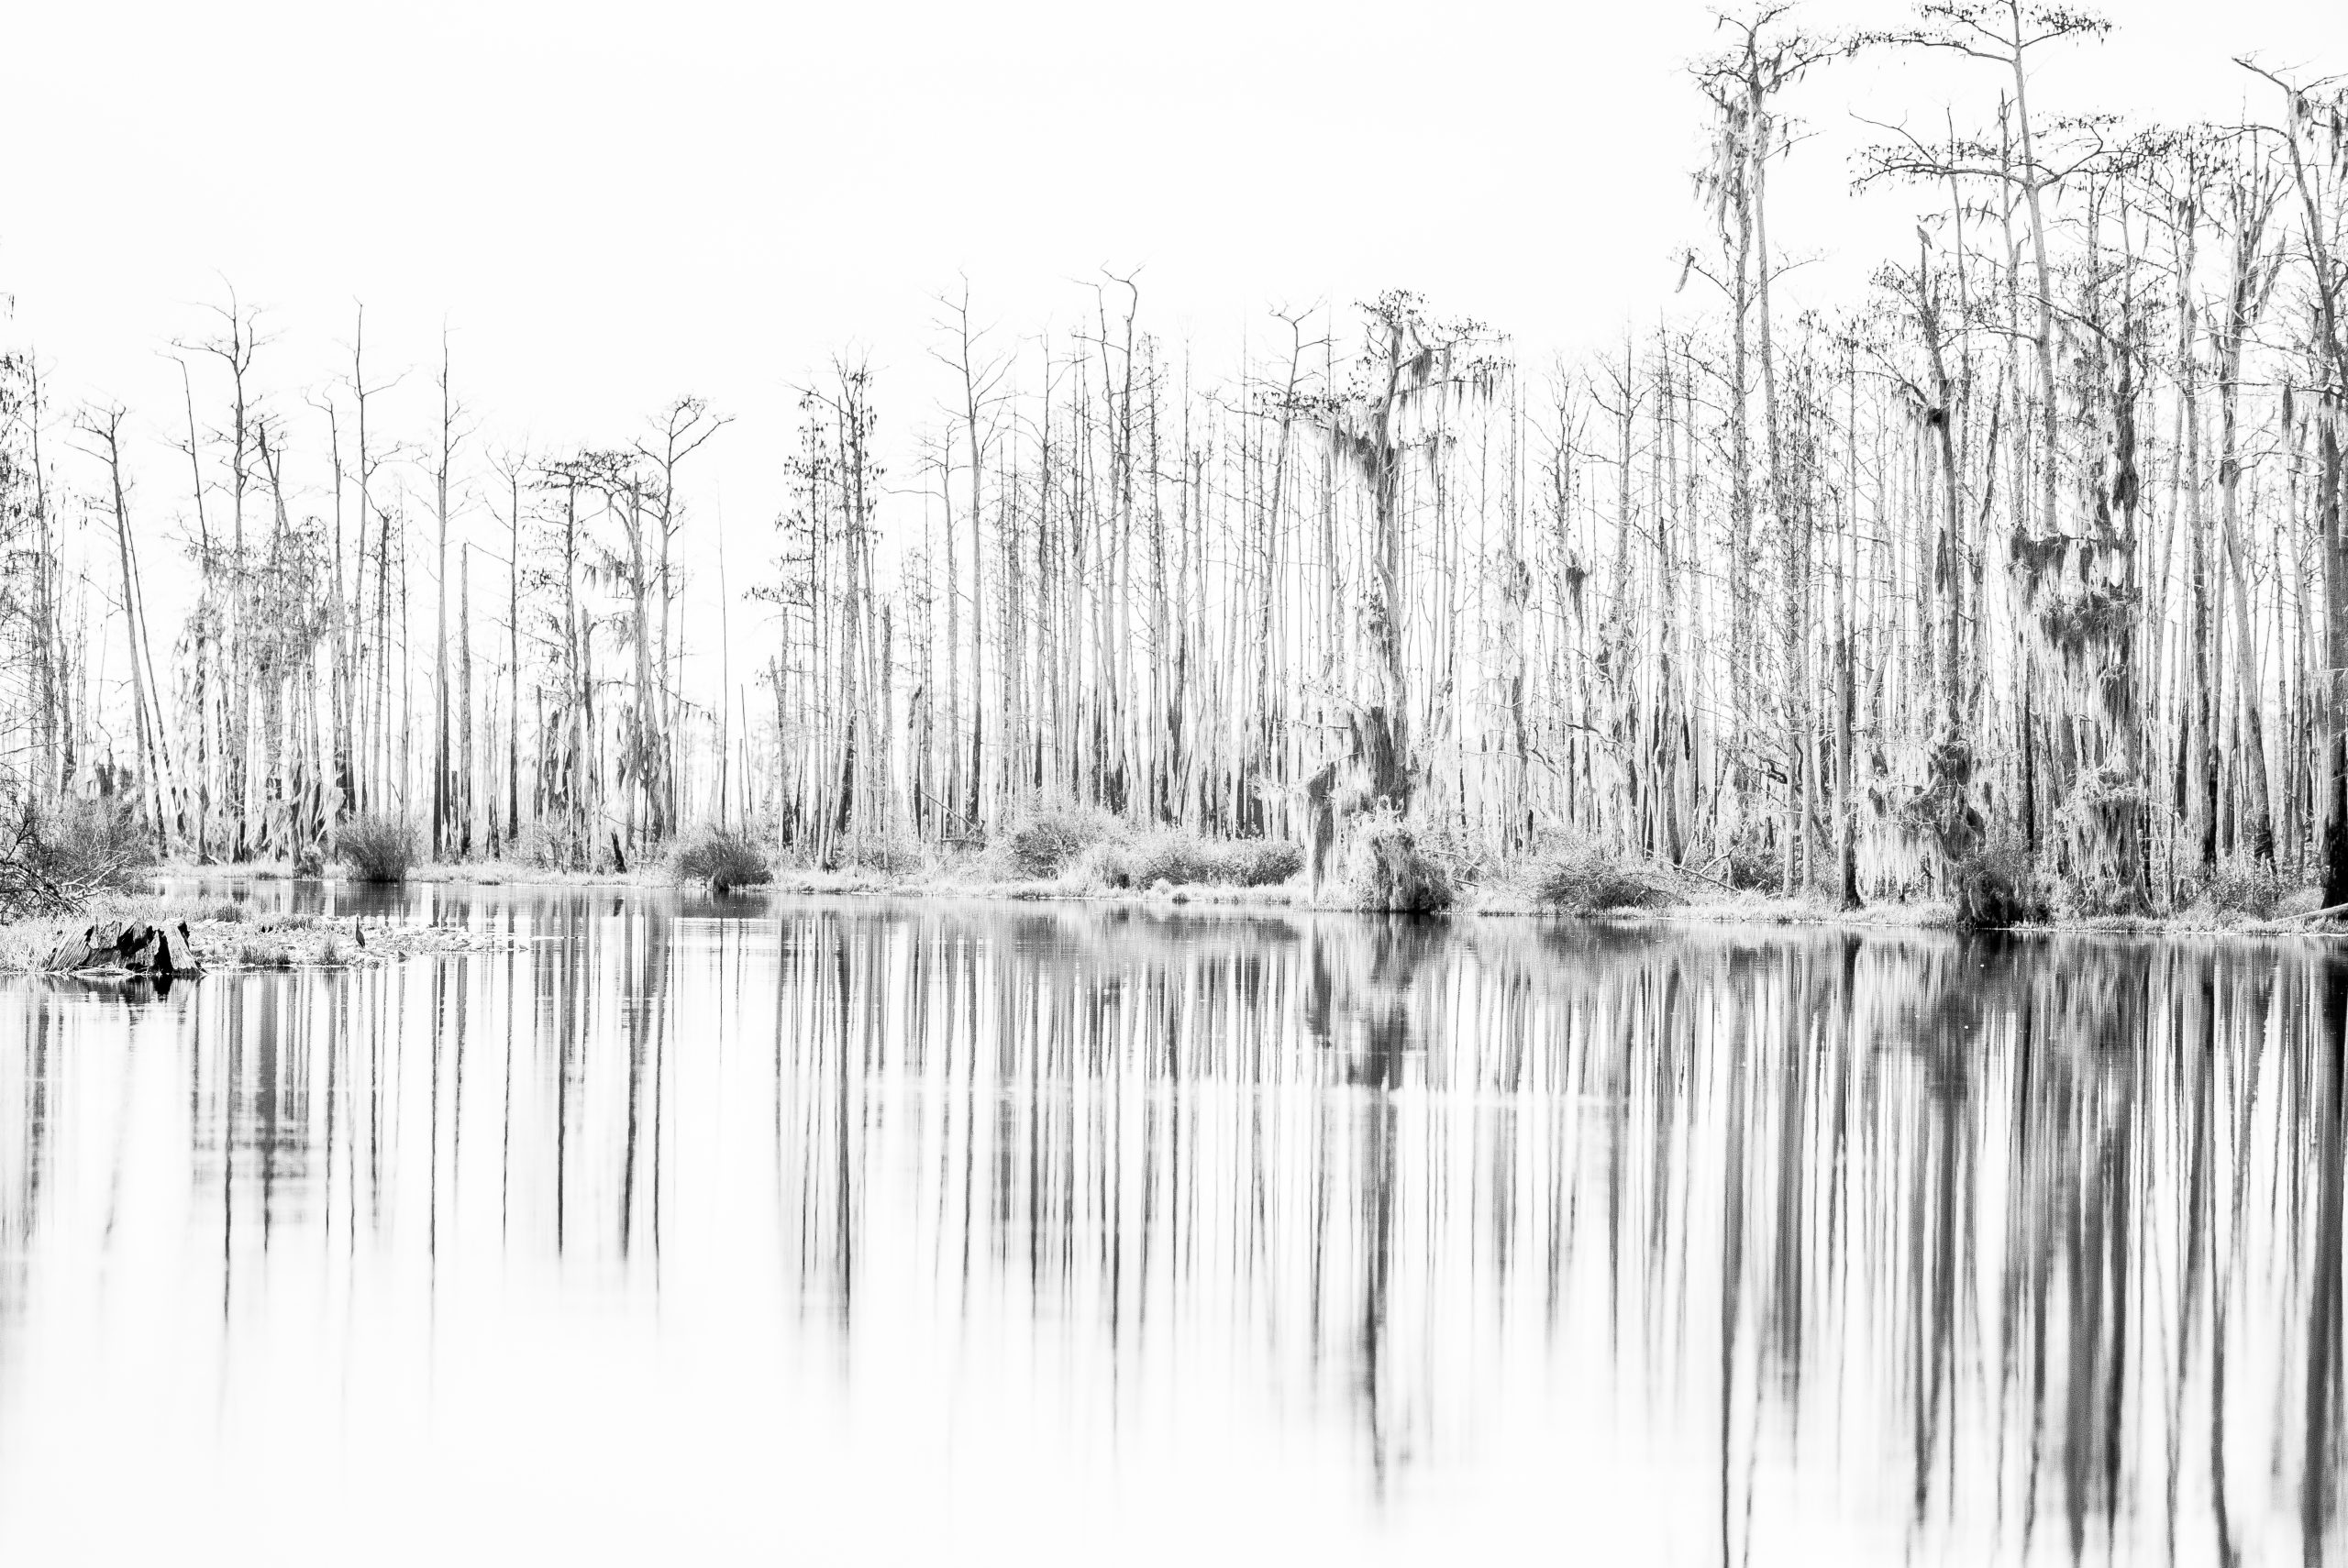 Reflections on Swamps